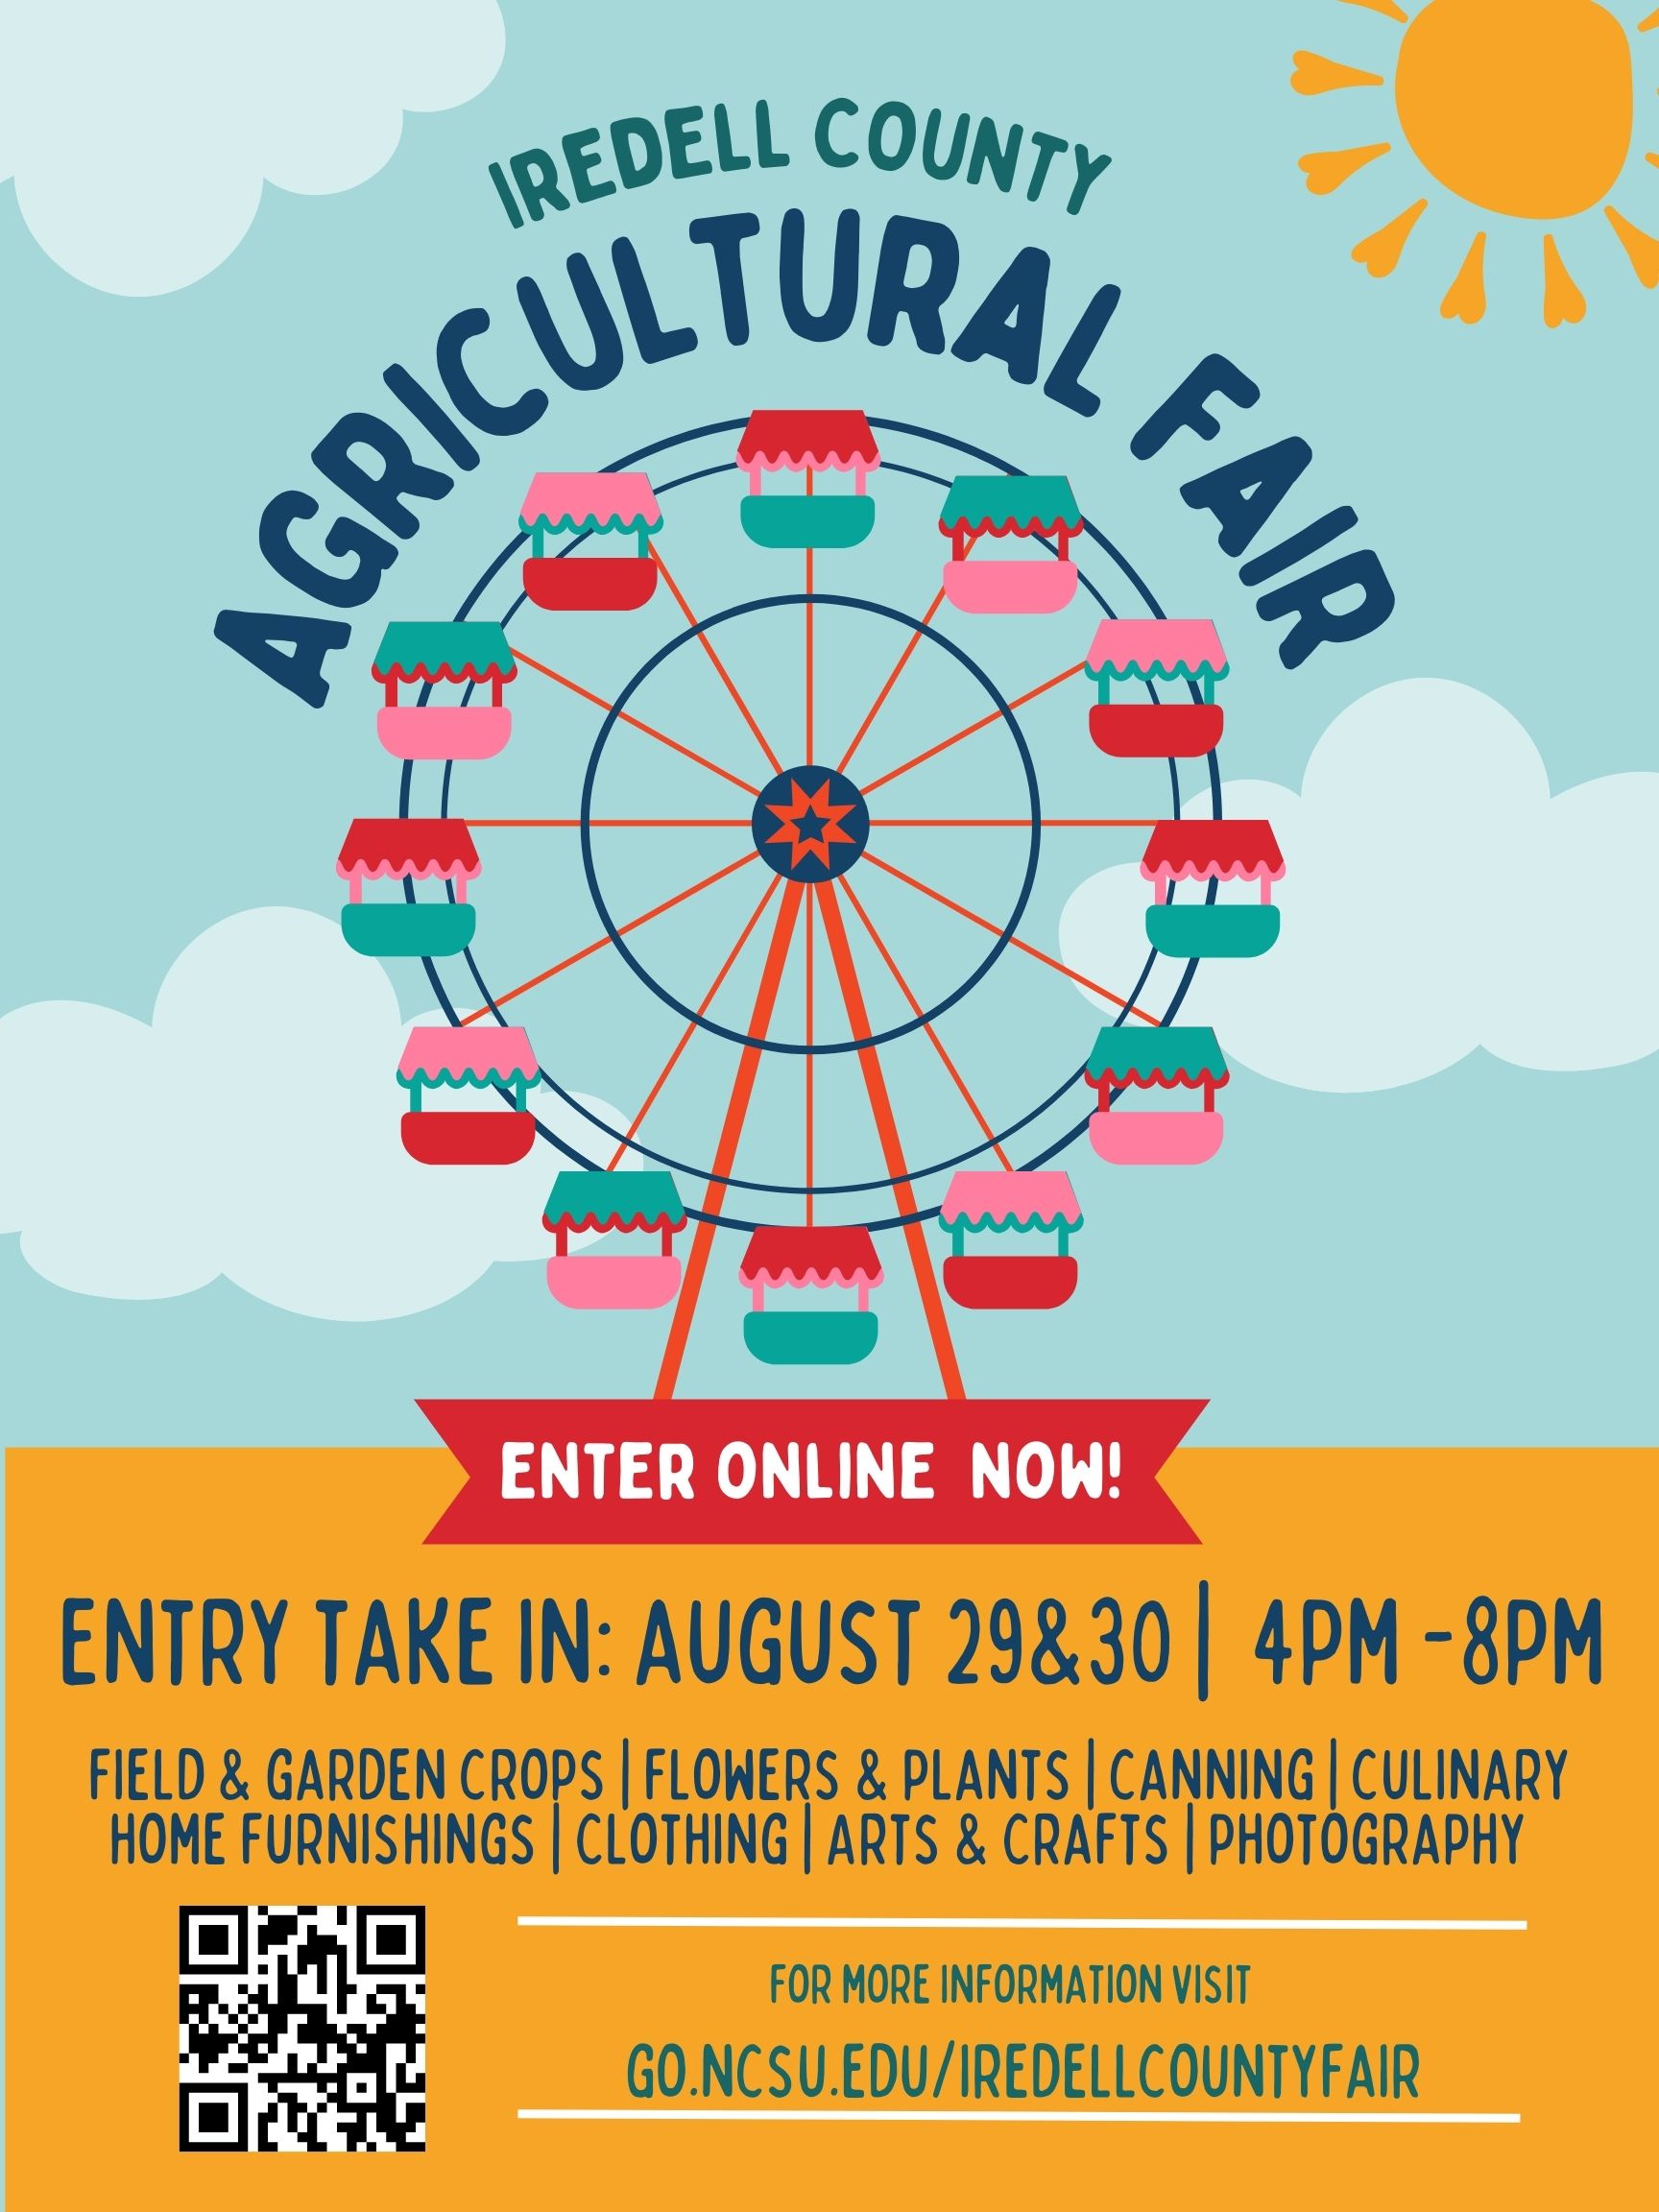 Flyer for Iredell County Agricultural Fair